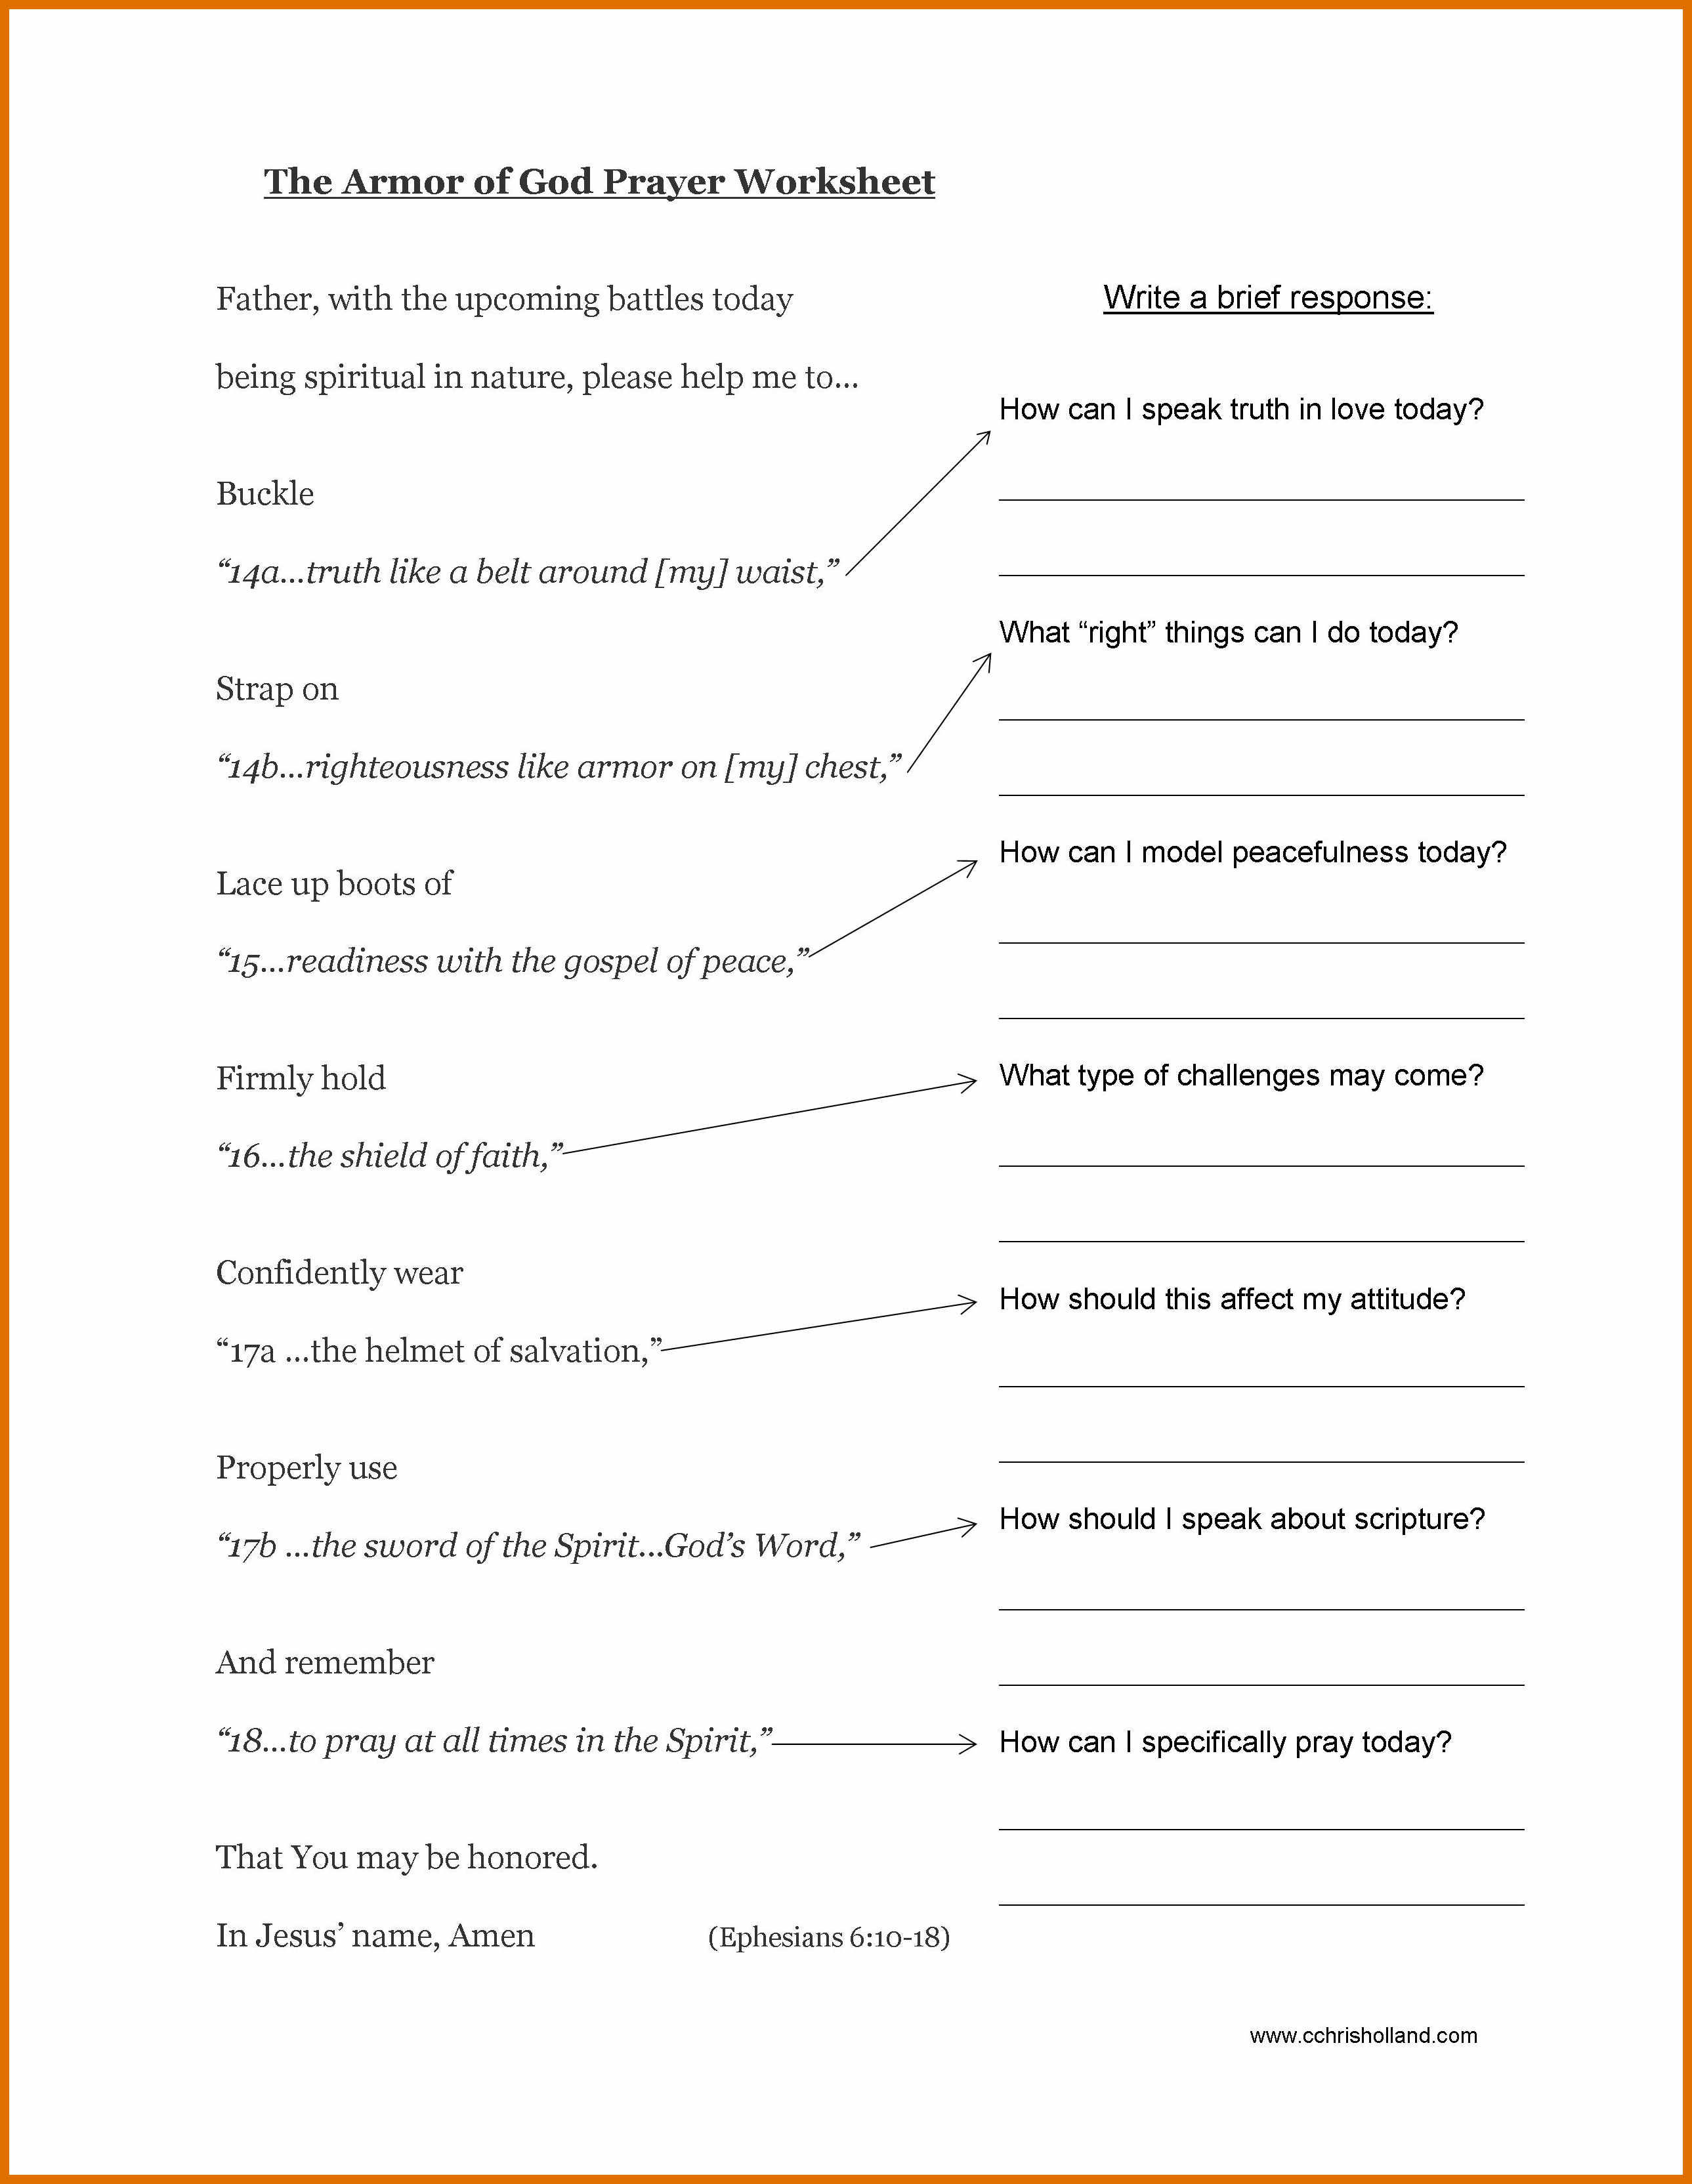 Free Printable Bible Study Worksheets For Adults Printable Worksheets